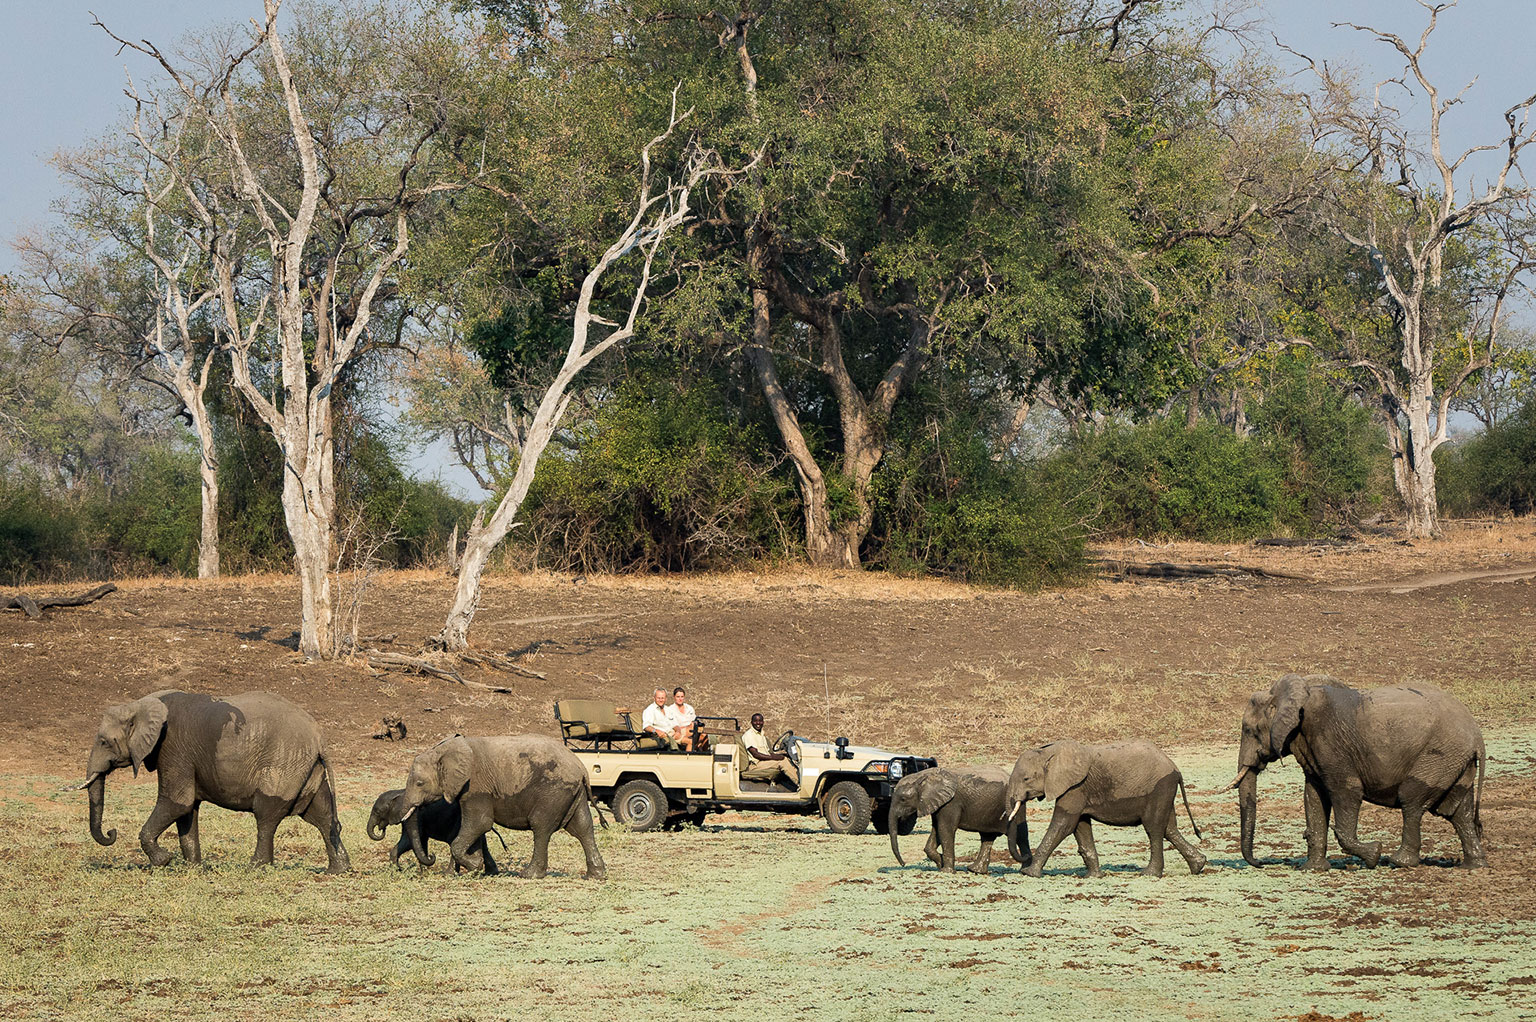 Elephant sighting in the Luangwa River preserve. 